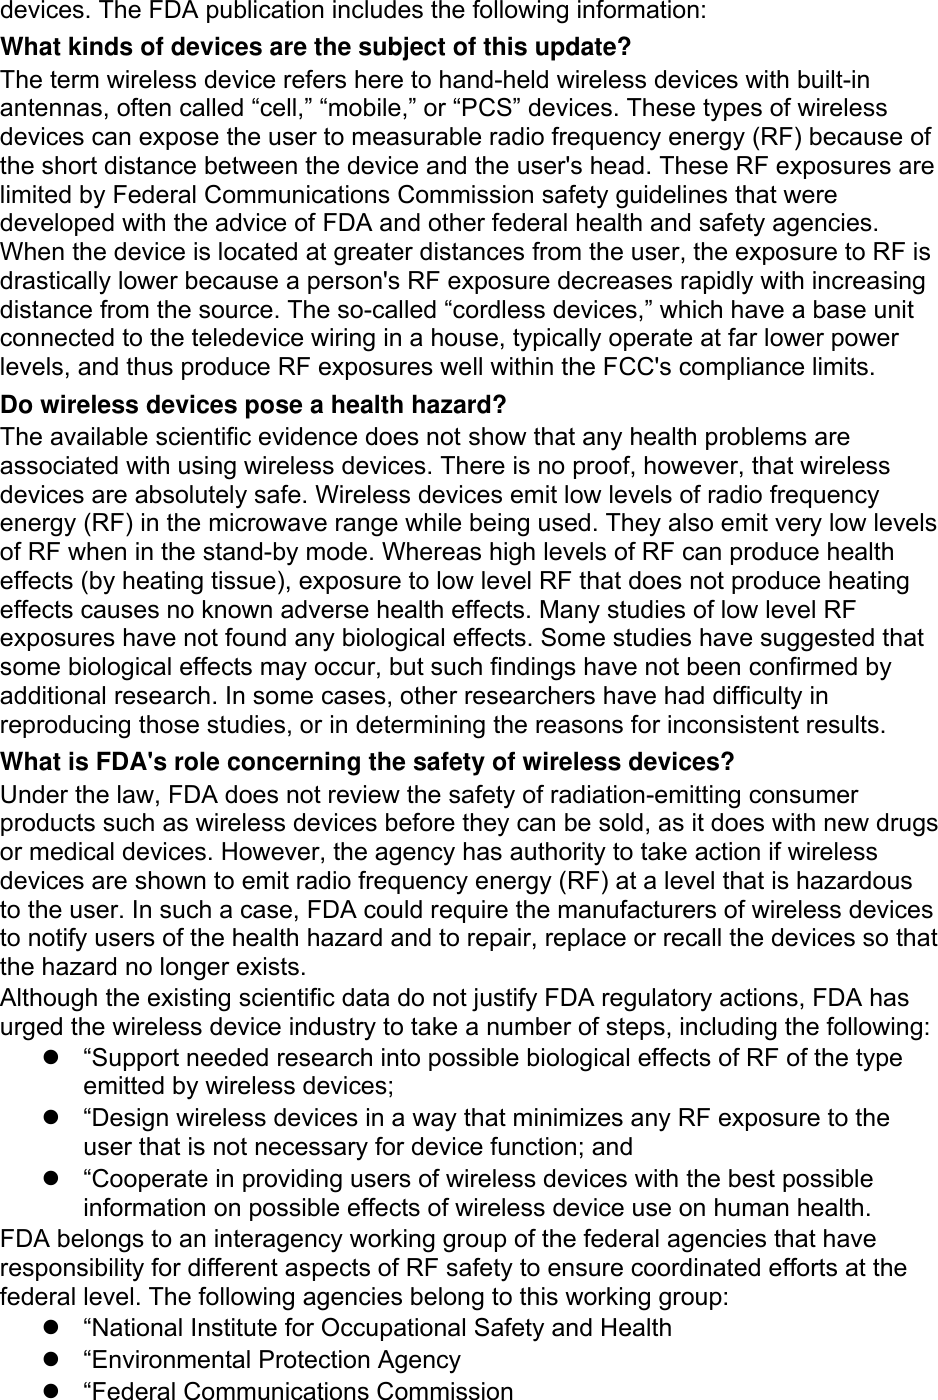 devices. The FDA publication includes the following information: What kinds of devices are the subject of this update? The term wireless device refers here to hand-held wireless devices with built-in antennas, often called “cell,” “mobile,” or “PCS” devices. These types of wireless devices can expose the user to measurable radio frequency energy (RF) because of the short distance between the device and the user&apos;s head. These RF exposures are limited by Federal Communications Commission safety guidelines that were developed with the advice of FDA and other federal health and safety agencies. When the device is located at greater distances from the user, the exposure to RF is drastically lower because a person&apos;s RF exposure decreases rapidly with increasing distance from the source. The so-called “cordless devices,” which have a base unit connected to the teledevice wiring in a house, typically operate at far lower power levels, and thus produce RF exposures well within the FCC&apos;s compliance limits. Do wireless devices pose a health hazard? The available scientific evidence does not show that any health problems are associated with using wireless devices. There is no proof, however, that wireless devices are absolutely safe. Wireless devices emit low levels of radio frequency energy (RF) in the microwave range while being used. They also emit very low levels of RF when in the stand-by mode. Whereas high levels of RF can produce health effects (by heating tissue), exposure to low level RF that does not produce heating effects causes no known adverse health effects. Many studies of low level RF exposures have not found any biological effects. Some studies have suggested that some biological effects may occur, but such findings have not been confirmed by additional research. In some cases, other researchers have had difficulty in reproducing those studies, or in determining the reasons for inconsistent results. What is FDA&apos;s role concerning the safety of wireless devices? Under the law, FDA does not review the safety of radiation-emitting consumer products such as wireless devices before they can be sold, as it does with new drugs or medical devices. However, the agency has authority to take action if wireless devices are shown to emit radio frequency energy (RF) at a level that is hazardous to the user. In such a case, FDA could require the manufacturers of wireless devices to notify users of the health hazard and to repair, replace or recall the devices so that the hazard no longer exists. Although the existing scientific data do not justify FDA regulatory actions, FDA has urged the wireless device industry to take a number of steps, including the following:   “Support needed research into possible biological effects of RF of the type emitted by wireless devices;   “Design wireless devices in a way that minimizes any RF exposure to the user that is not necessary for device function; and   “Cooperate in providing users of wireless devices with the best possible information on possible effects of wireless device use on human health. FDA belongs to an interagency working group of the federal agencies that have responsibility for different aspects of RF safety to ensure coordinated efforts at the federal level. The following agencies belong to this working group:   “National Institute for Occupational Safety and Health   “Environmental Protection Agency   “Federal Communications Commission 